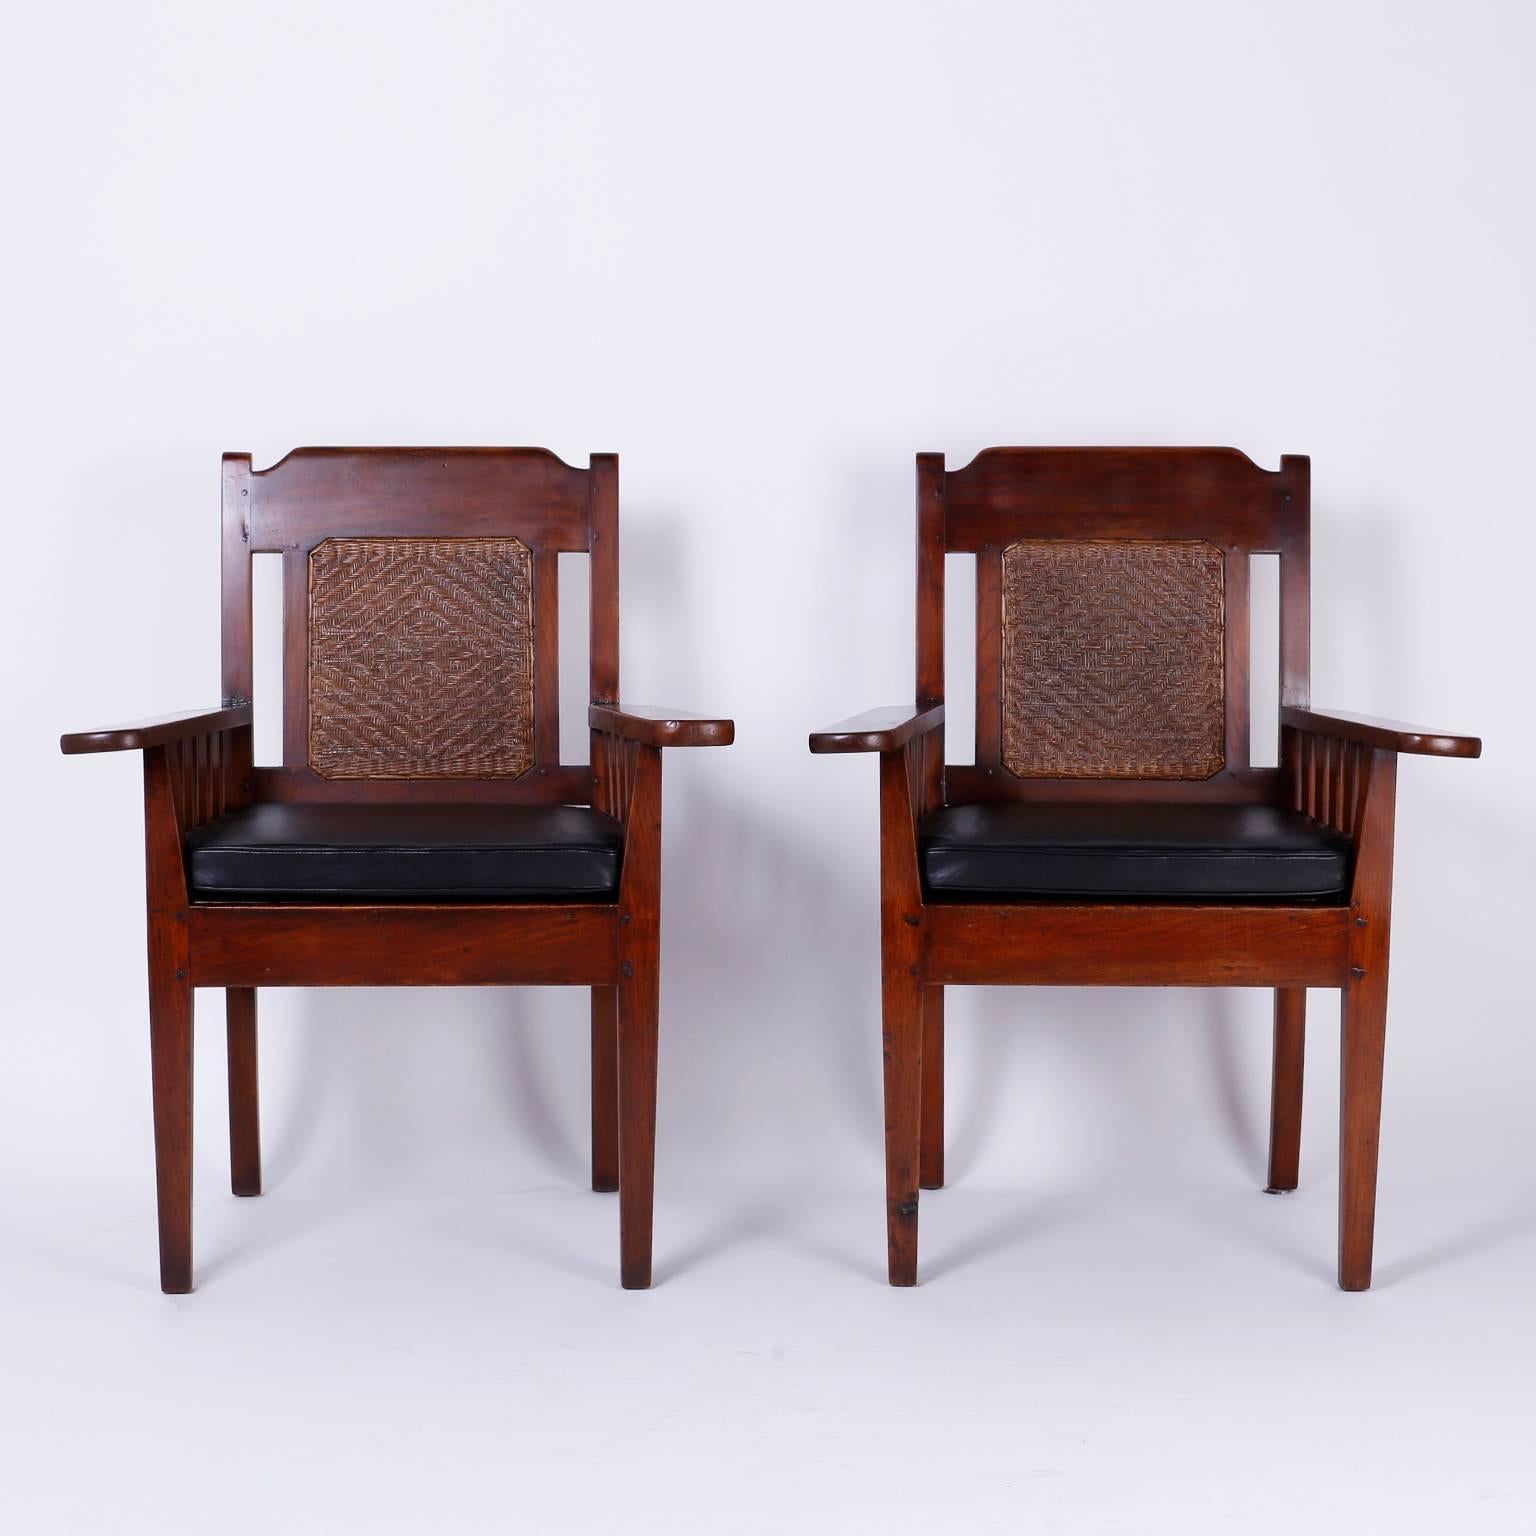 Here is an intriguing pair of Anglo Indian mahogany arm chairs with a curious set of influences. Featuring Herringbone caning on the backs, elongated arms with an arts and Craft or Mission form and pegged construction a seat option of leather